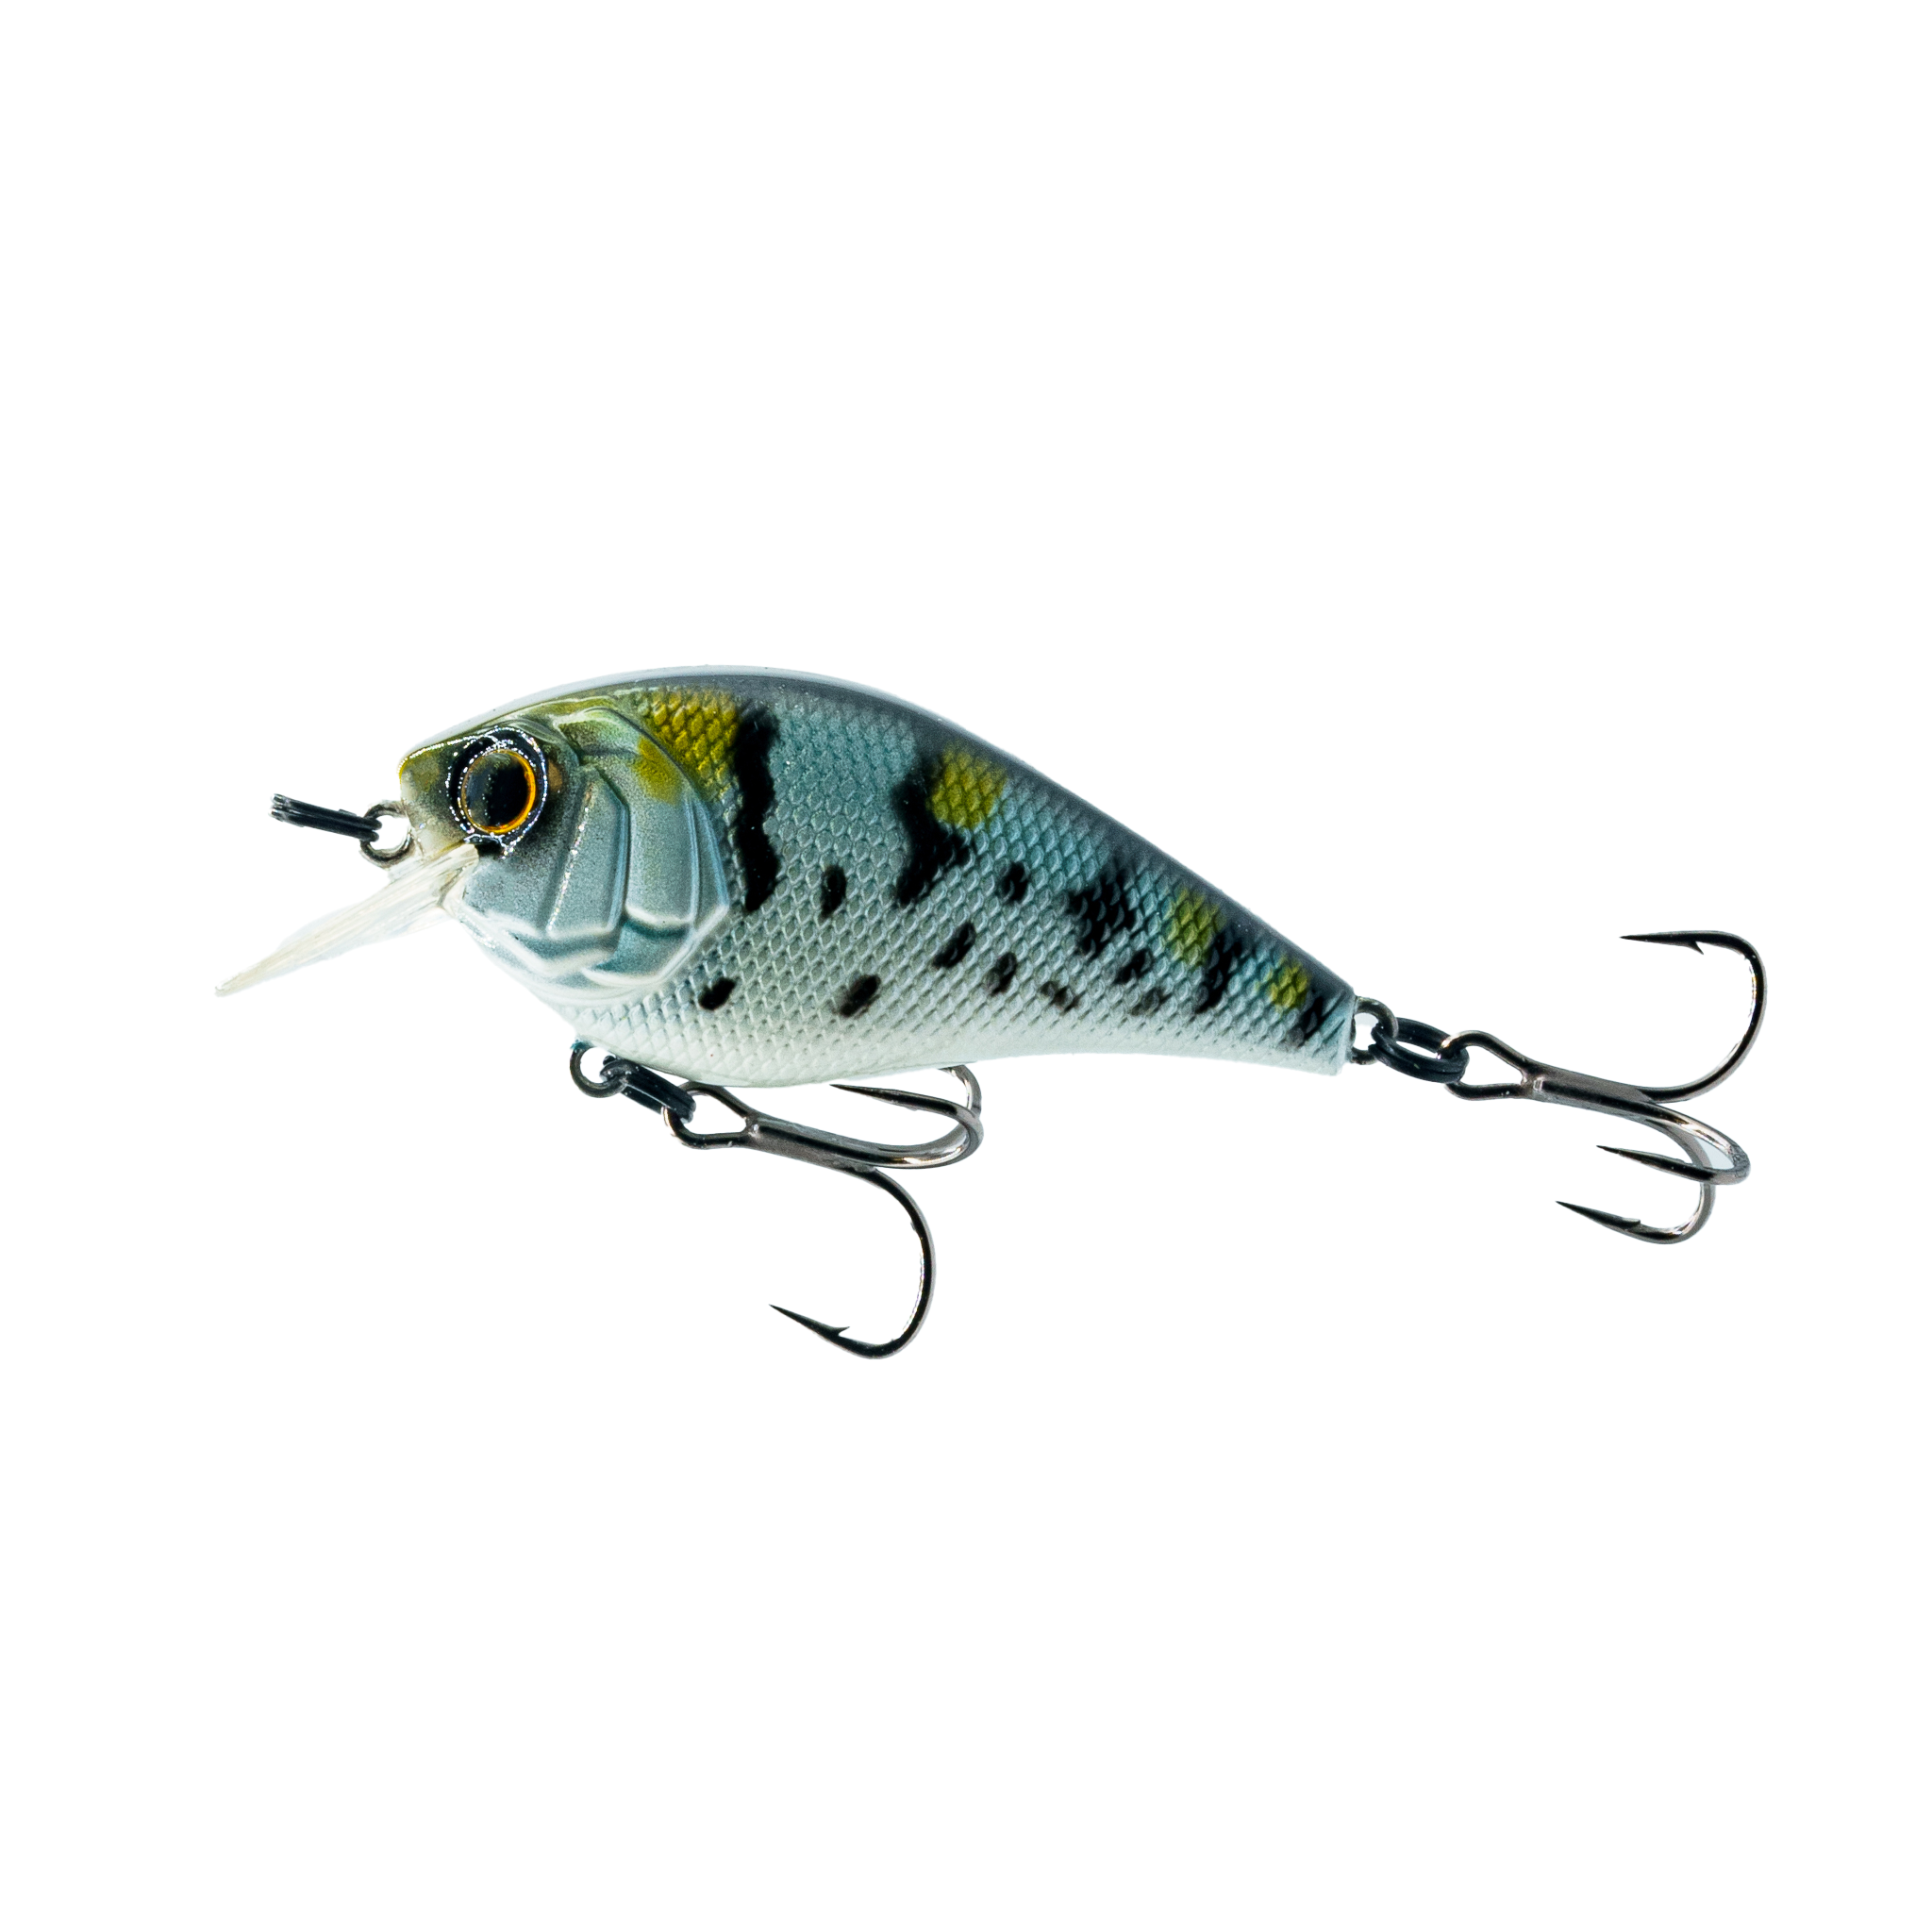 NEW 6TH SENSE FISHING PRODUCTS!! New baits for Crappie, BFS and